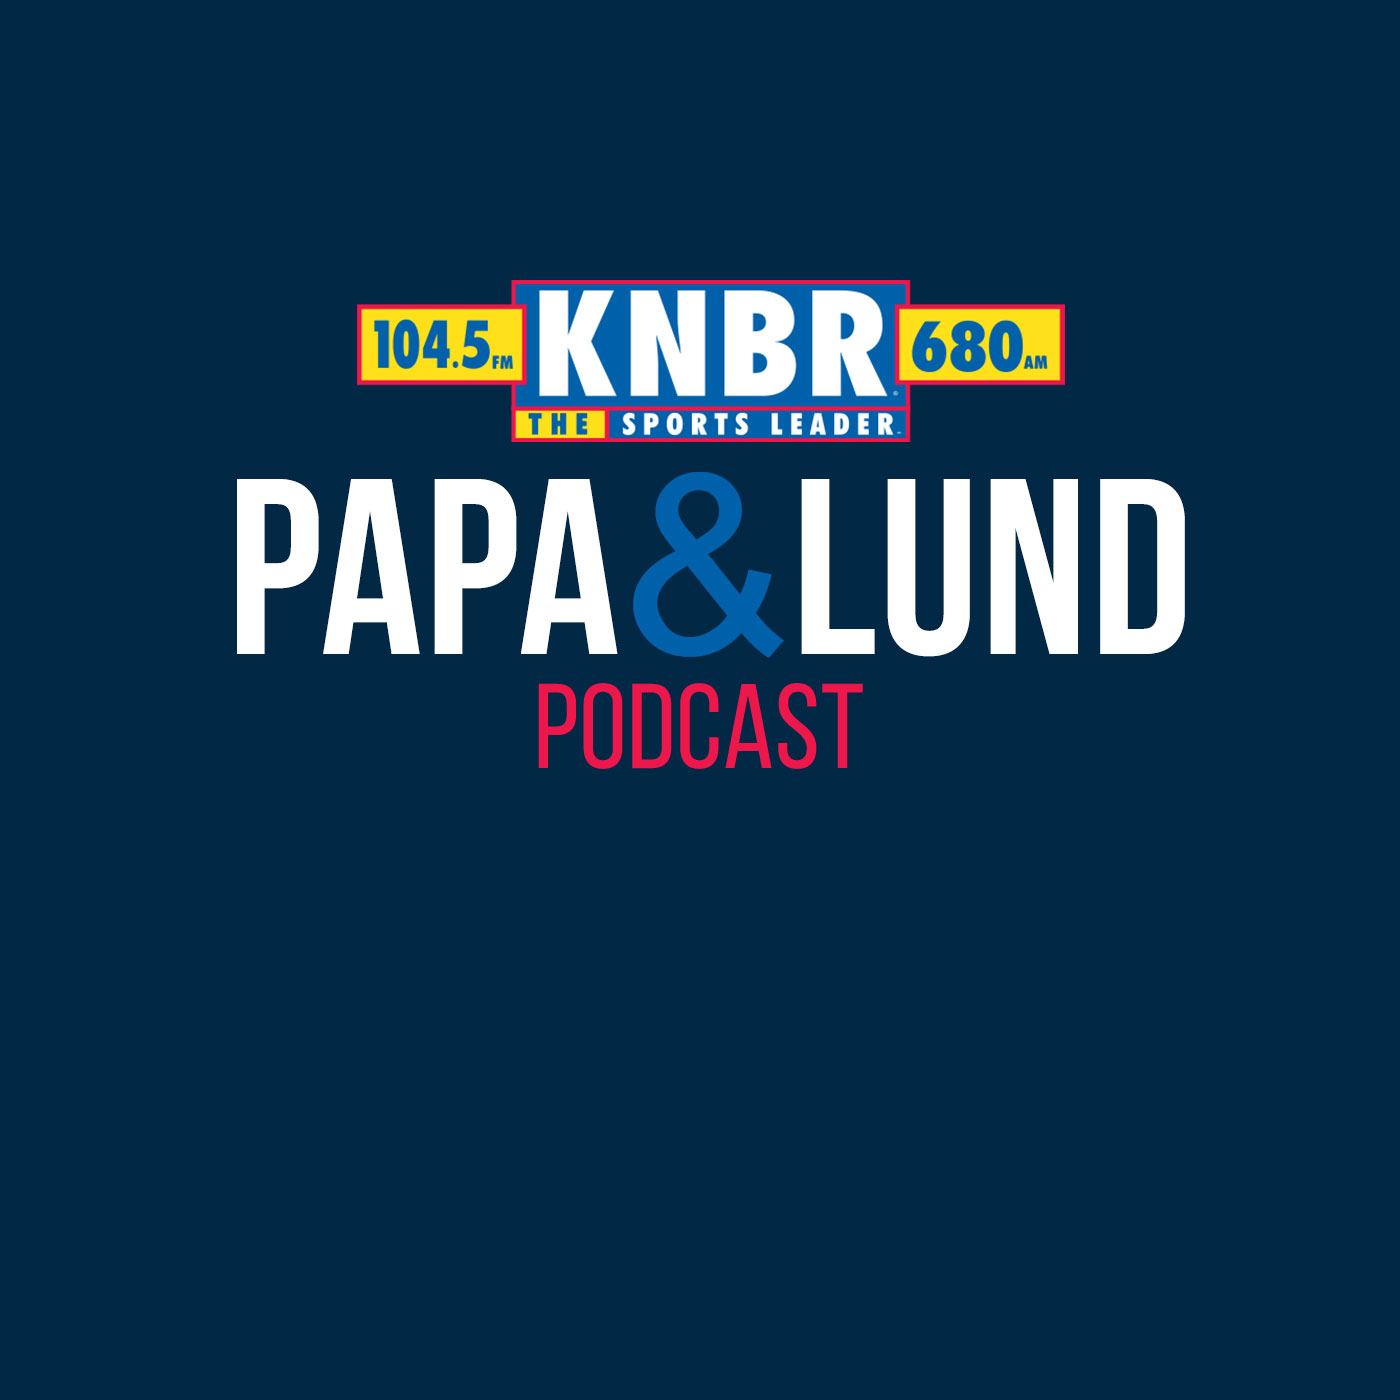 2-2 Dennis Brown joins Papa & Lund to discuss the rough ending to an amazing 49ers season and what fans have to look forward to as the Quest for Six continues